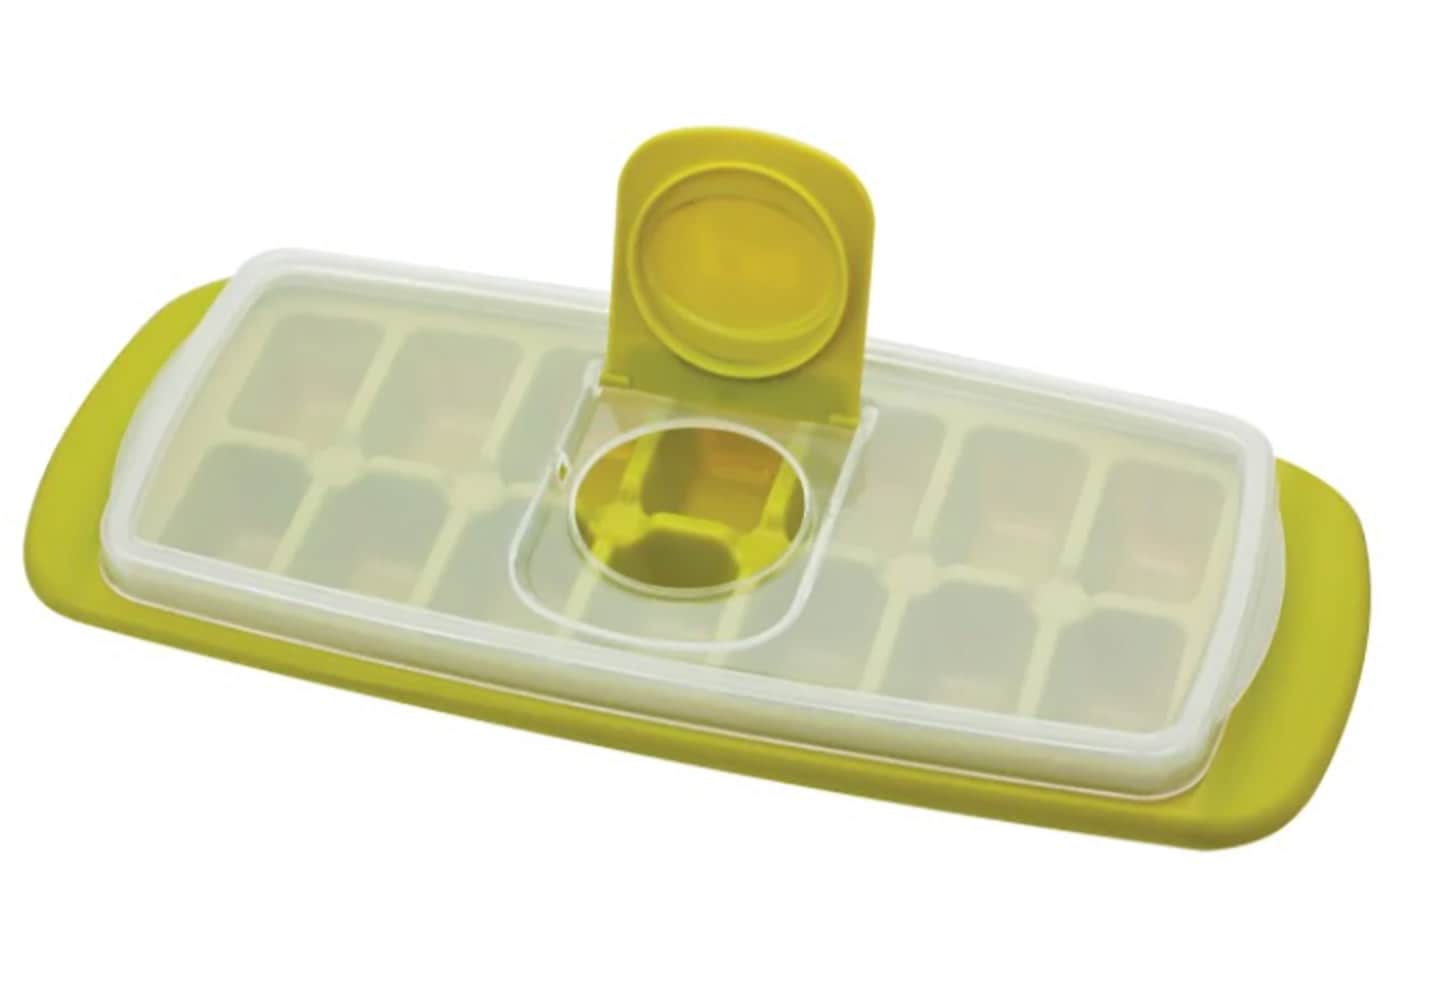 Joie Ice Cube Tray Kitchen Gadget Review 